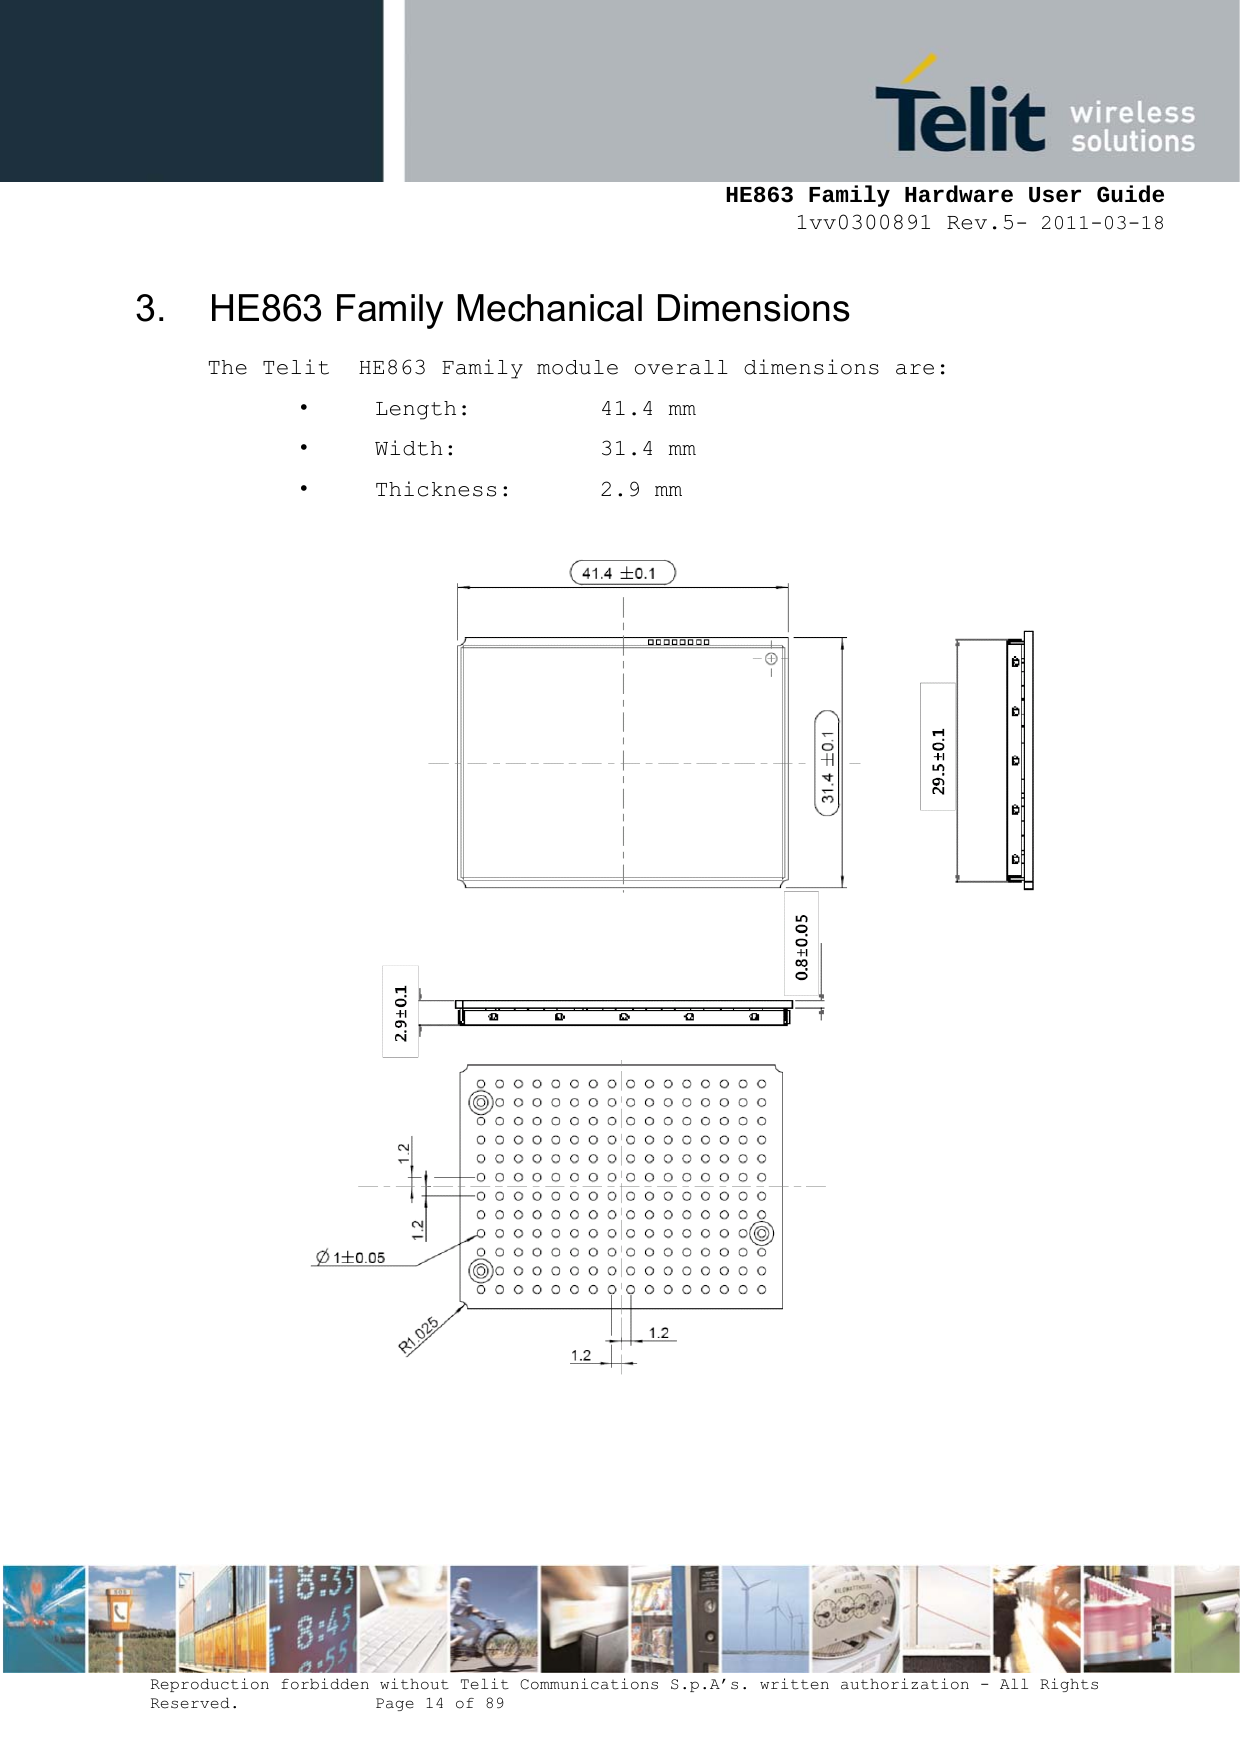     HE863 Family Hardware User Guide 1vv0300891 Rev.5- 2011-03-18    Reproduction forbidden without Telit Communications S.p.A’s. written authorization - All Rights Reserved.    Page 14 of 89  3.  HE863 Family Mechanical Dimensions The Telit  HE863 Family module overall dimensions are:  •  Length:     41.4 mm •  Width:     31.4 mm •  Thickness:   2.9 mm    